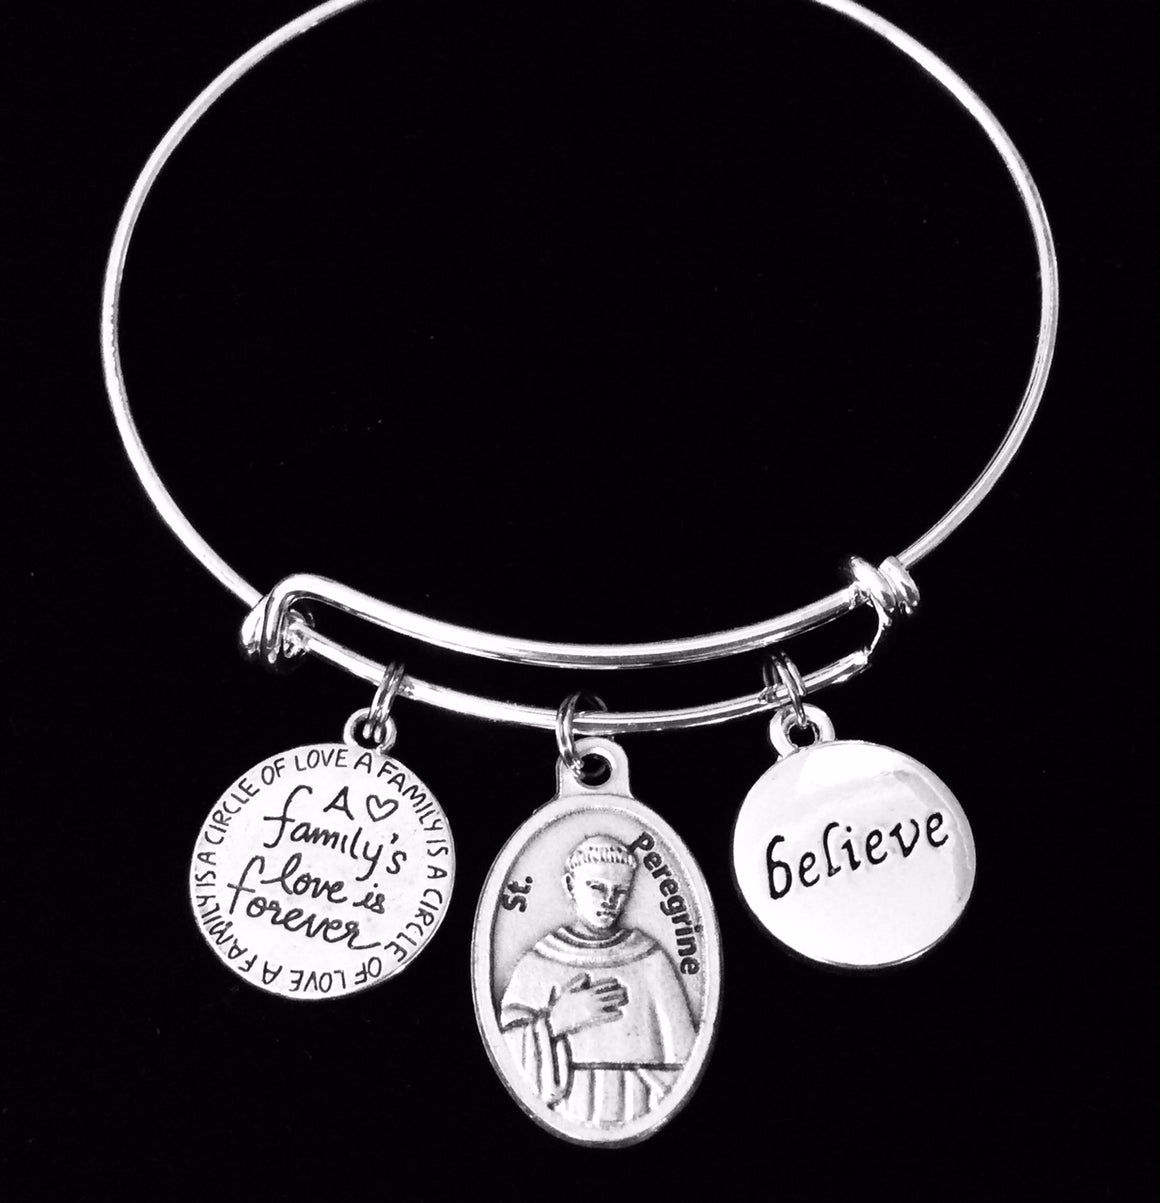 Saint Peregrine Expandable Charm Bracelet Silver Adjustable Wire Bangle Stacking One Size Fits All Gift